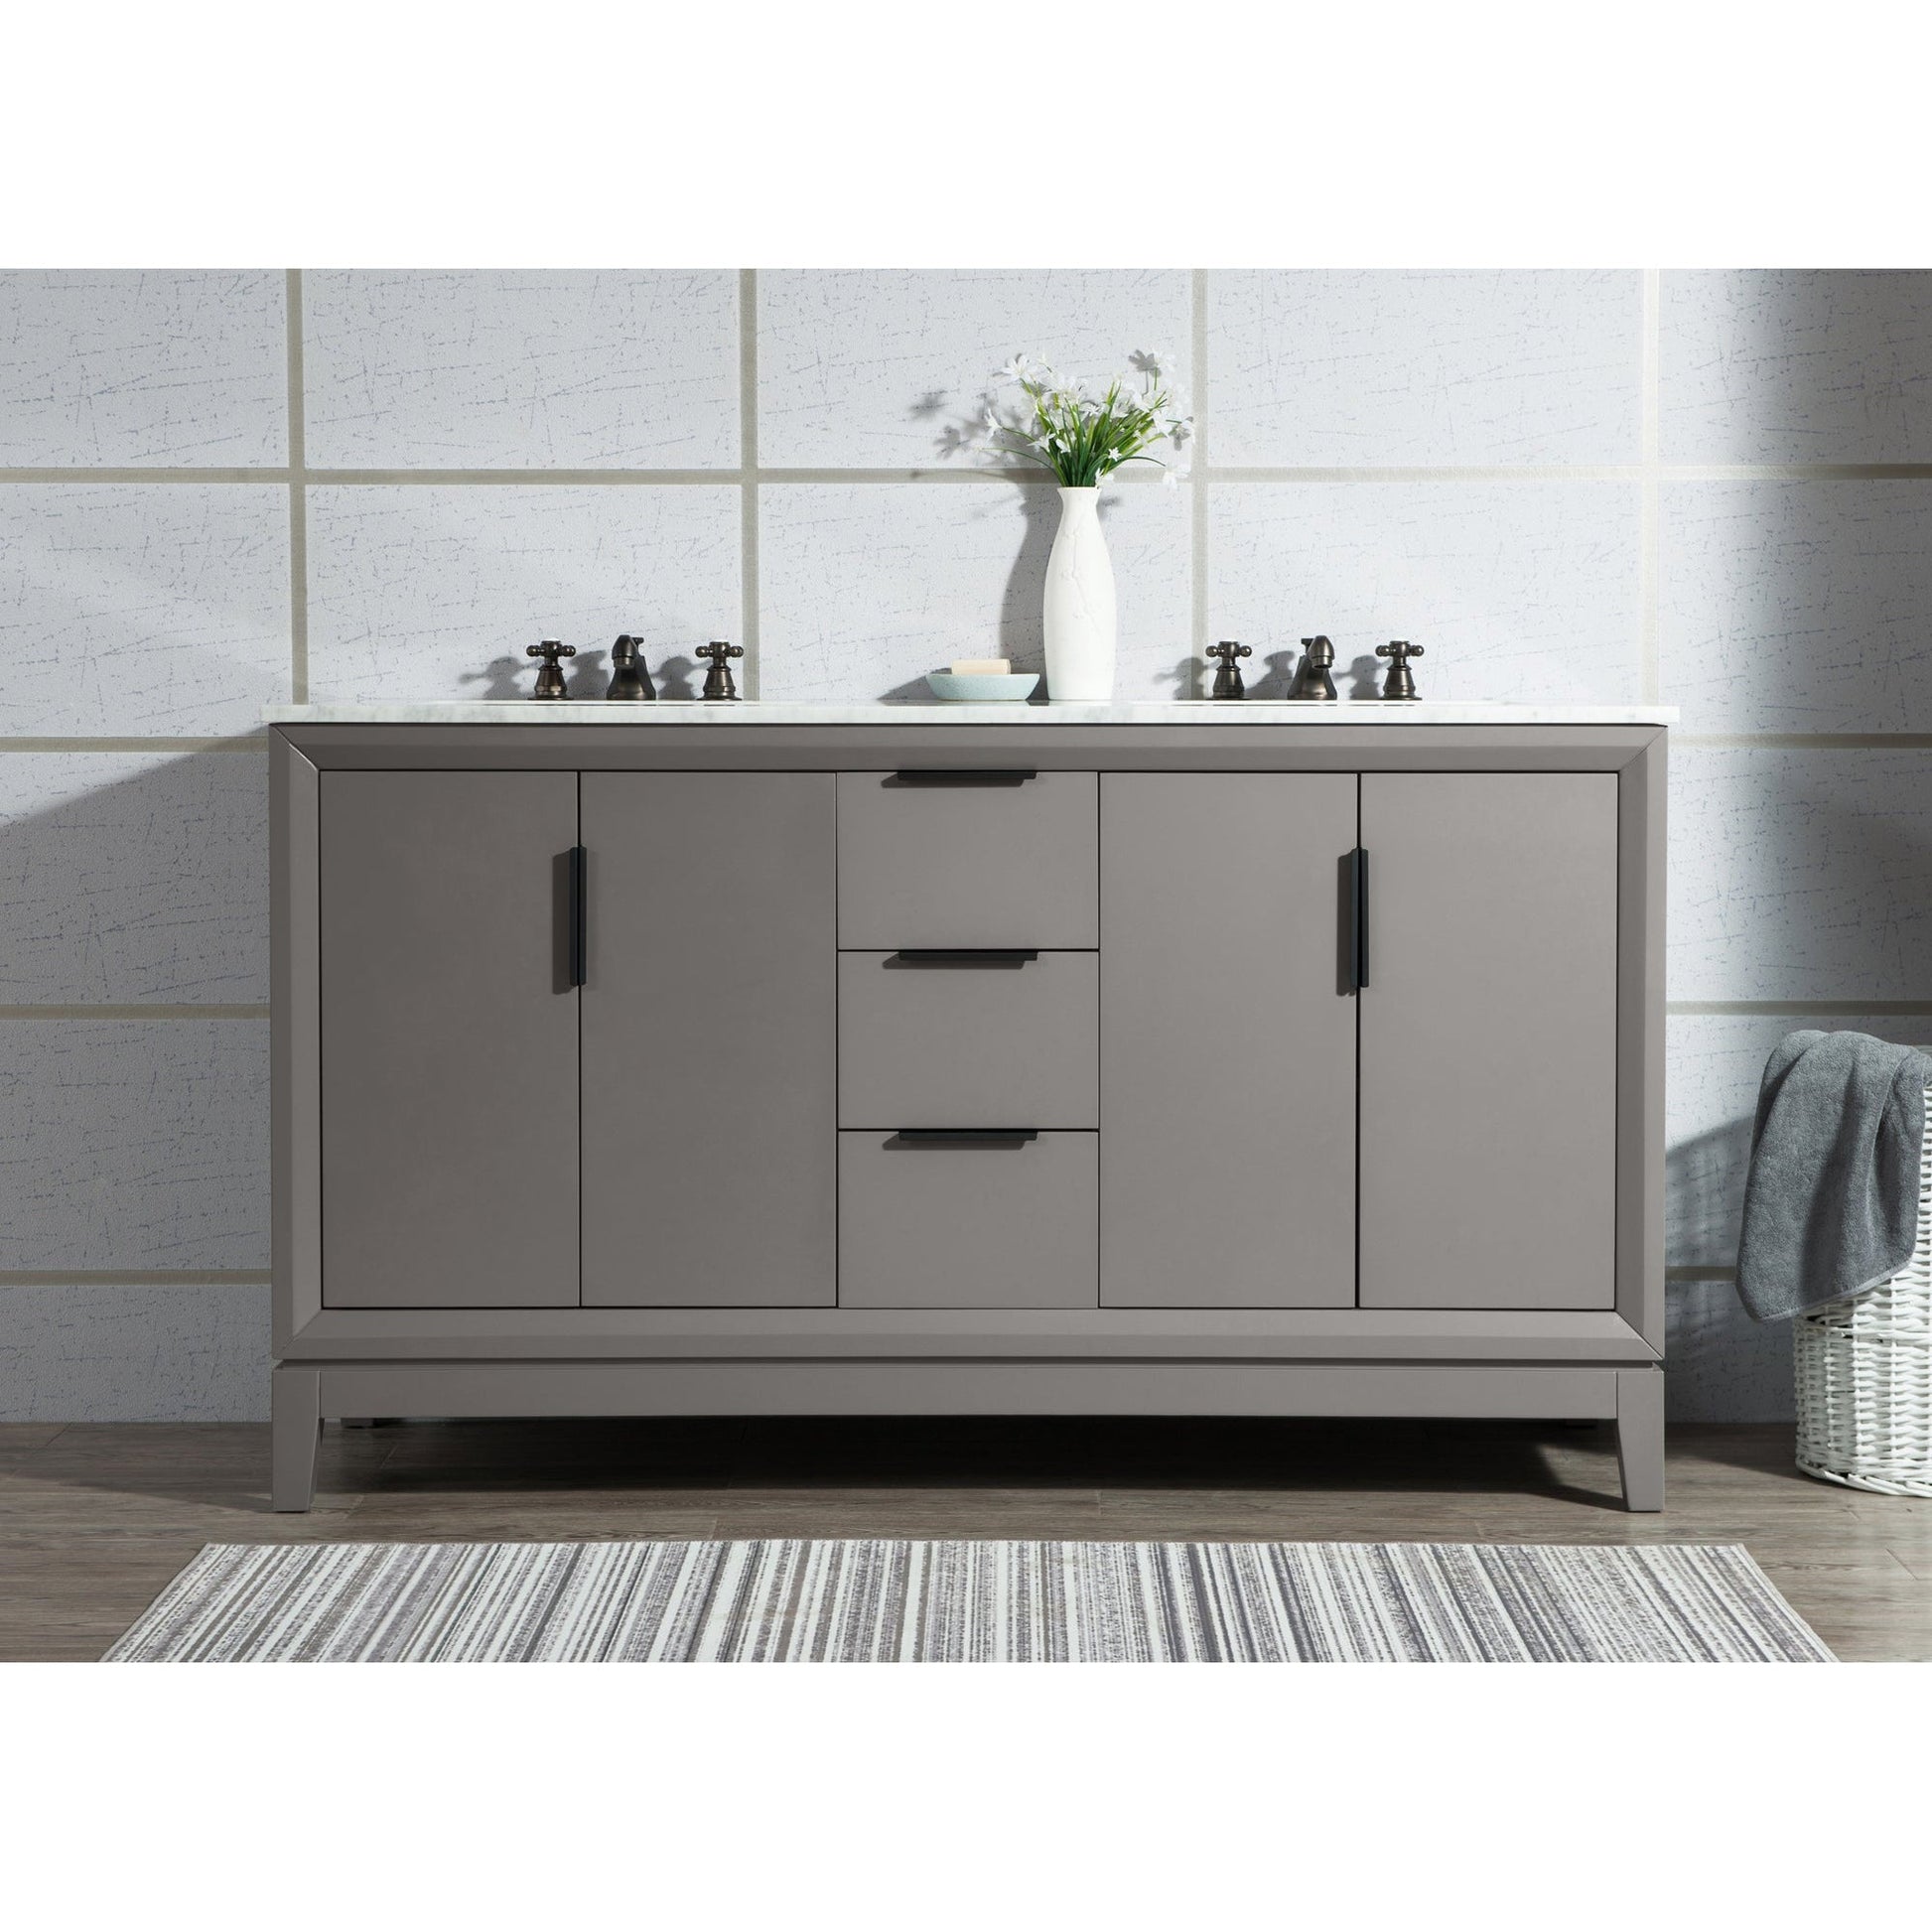 Water Creation Elizabeth 60" Double Sink Carrara White Marble Vanity In Cashmere Grey With Matching Mirror